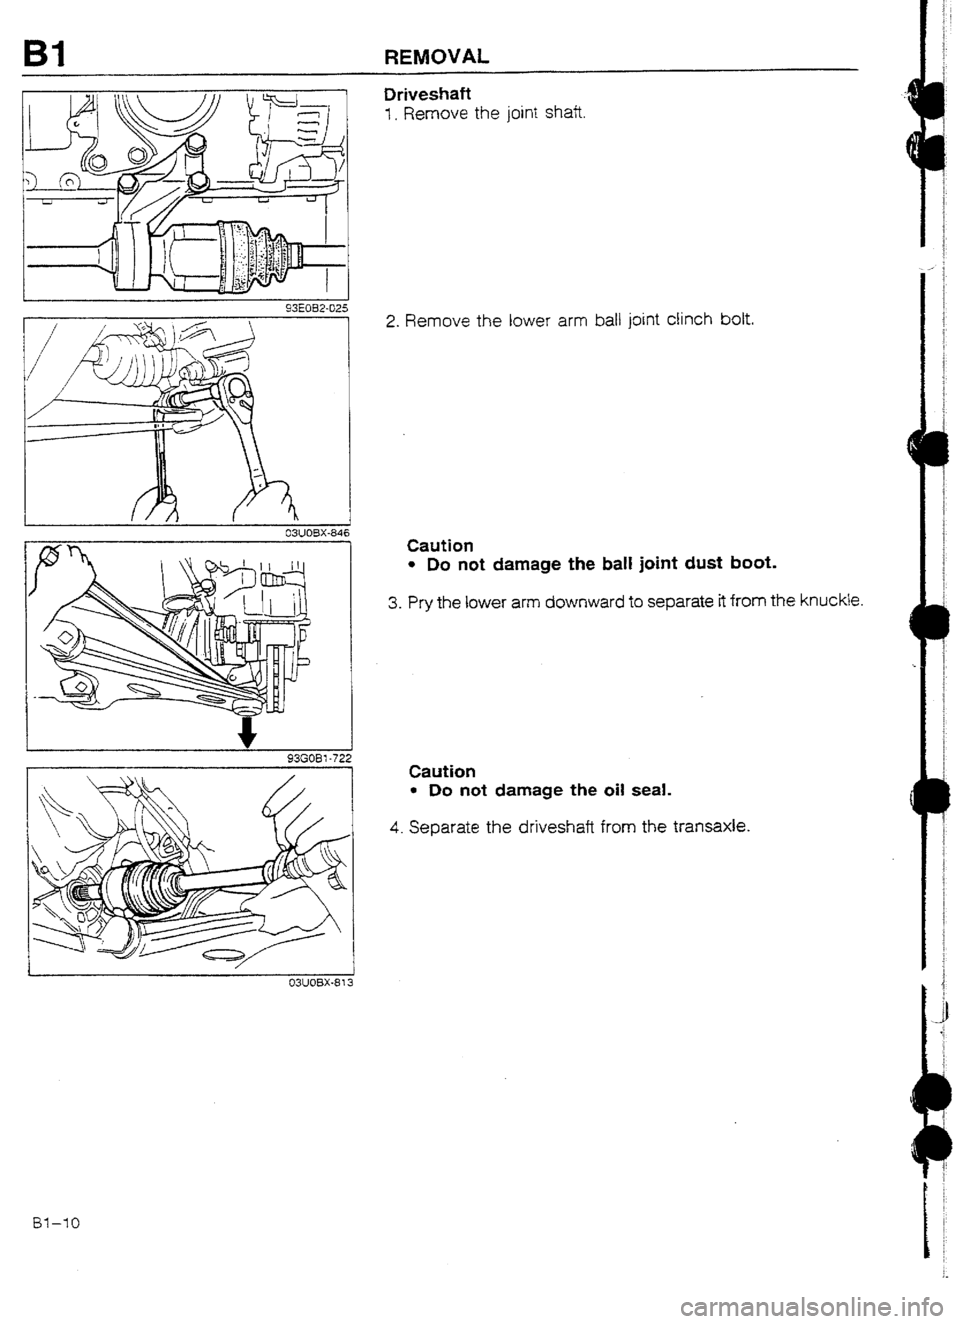 MAZDA 232 1990   Suplement Owners Guide Bl REMOVAL 
Driveshaft 
1. Remove the joint shaft 
L I 93EOB2-025 
_ 03UOBX-84 
2. Remove the lower arm ball joint clinch bolt. 
Caution 
l Do not damage the ball joint dust boot. 
3. Pry the lower ar